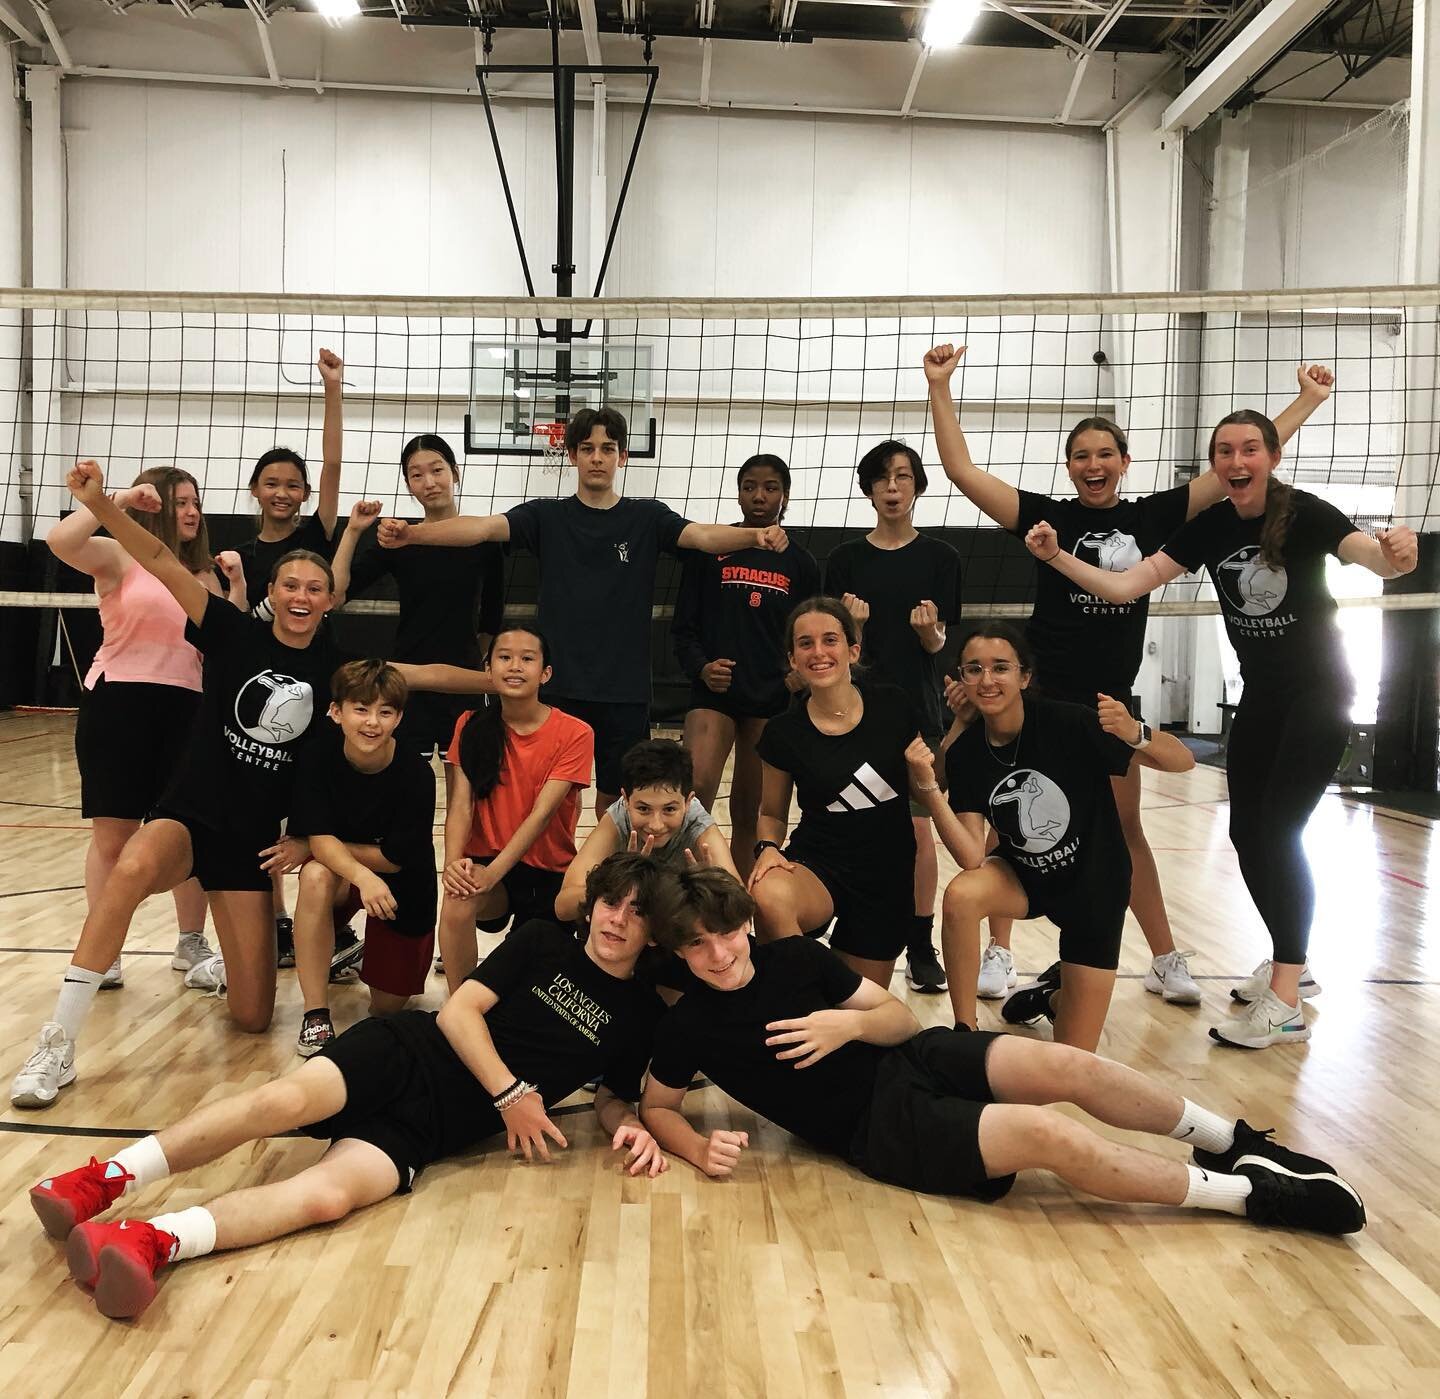 Last week was our first summer day camp session with lead coach @alisa.gavva at Vaughan Sportplex! 18 kids spent the week with our awesome all-female coaching staff, @abbydelamere and @giuliachimii . It was a full week of training hard, learning lots